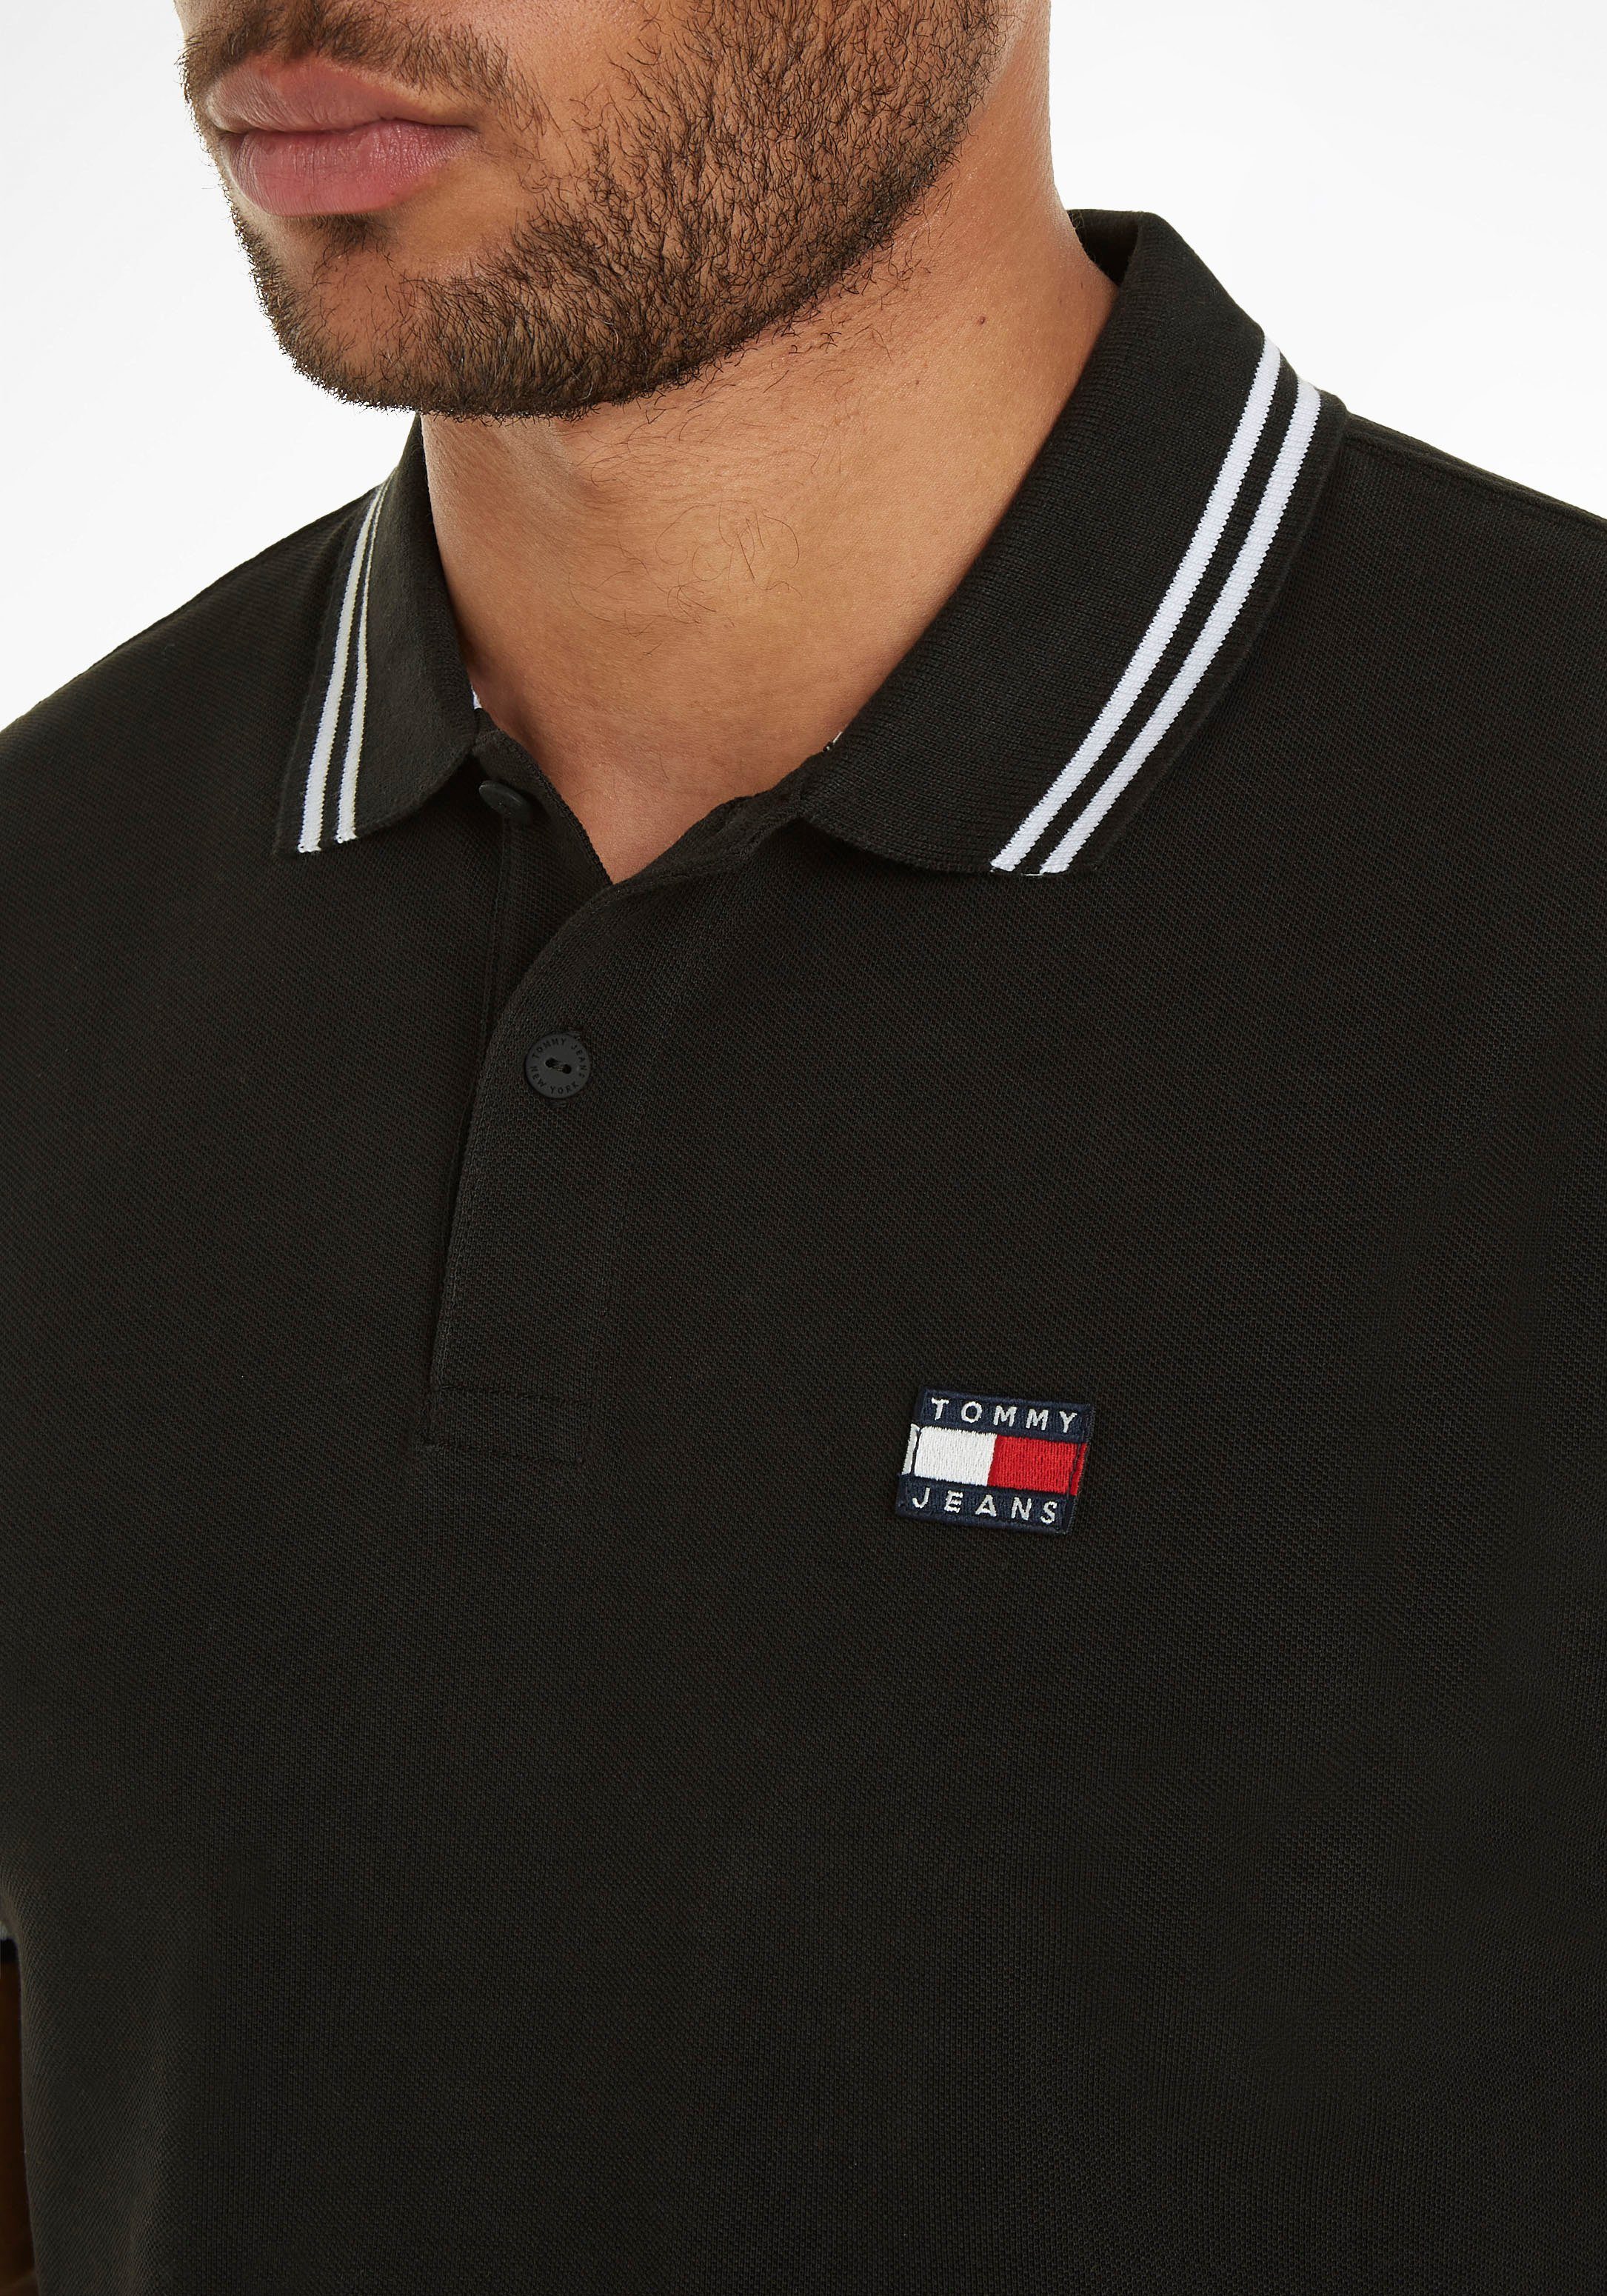 CLSC Tommy POLO TIPPING Black Jeans Poloshirt DETAIL TJM